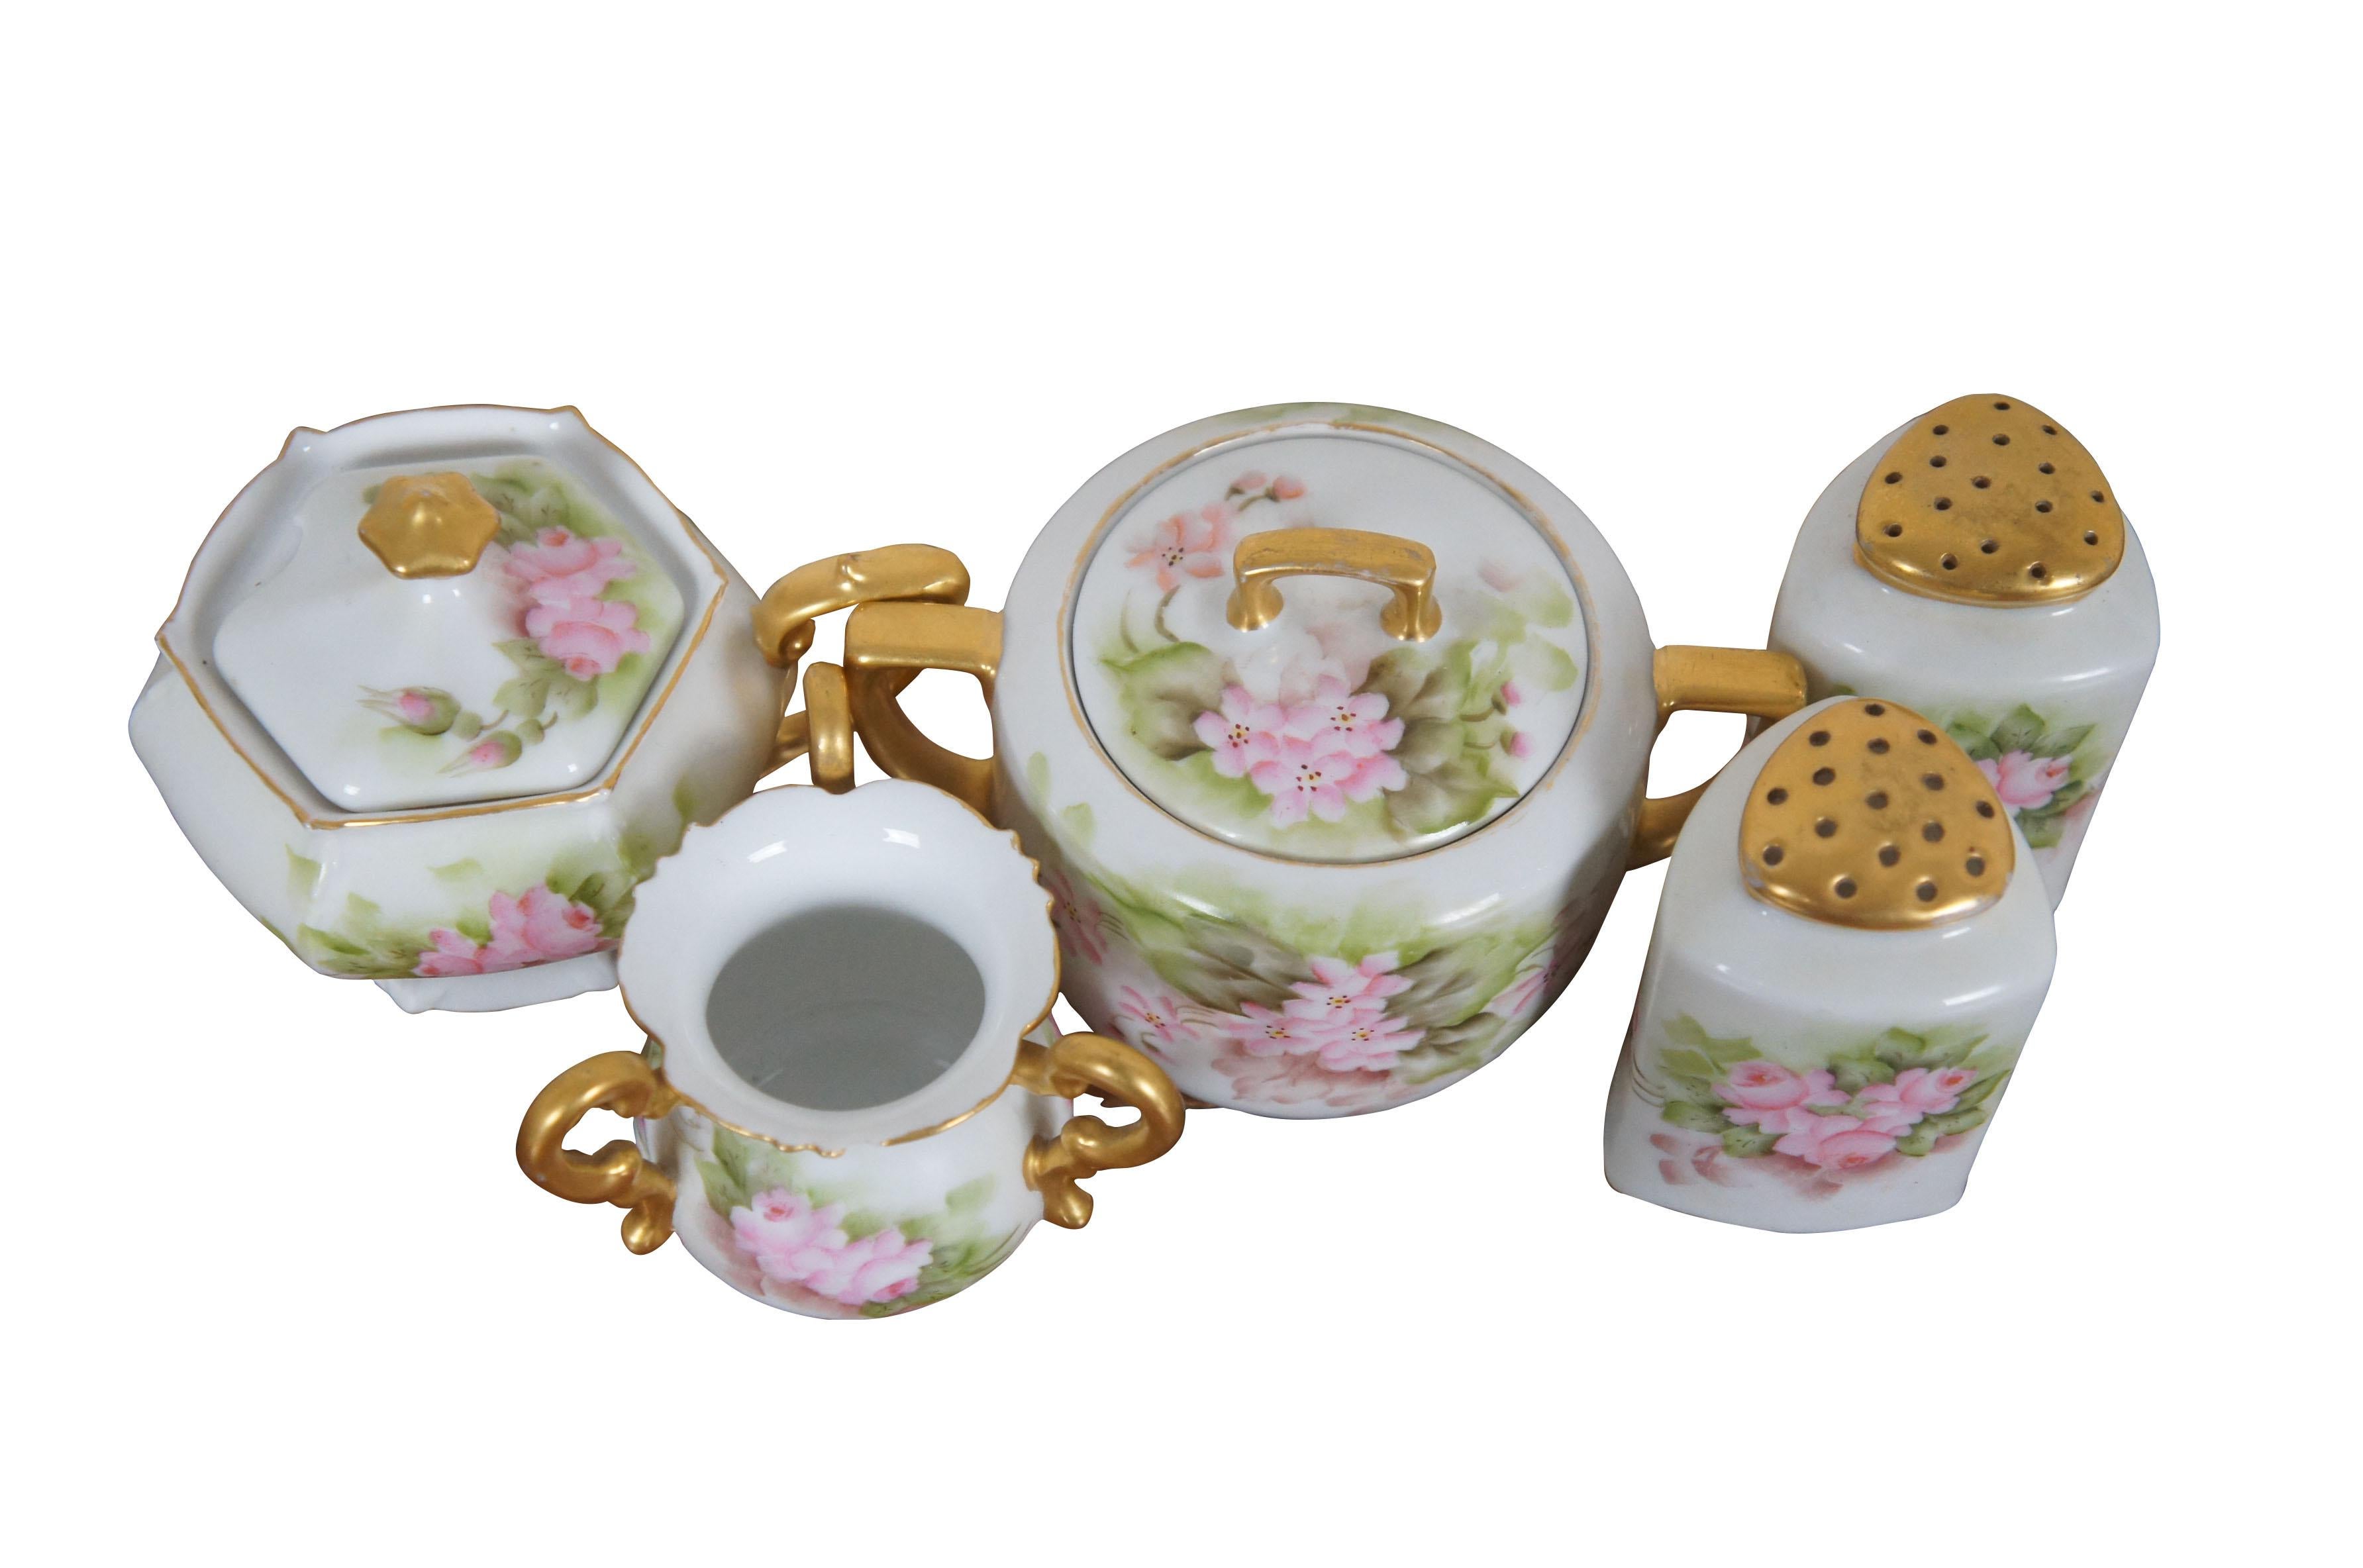 Late 19th - early 20th century.  Neat set of assorted tableware pieces, all decorated with hand painted pink flowers, green leaves, and gilded accents by F. Foljan. Double handled sugar bowl with lid by MZ Austria, incised number 1190/S (Mark used